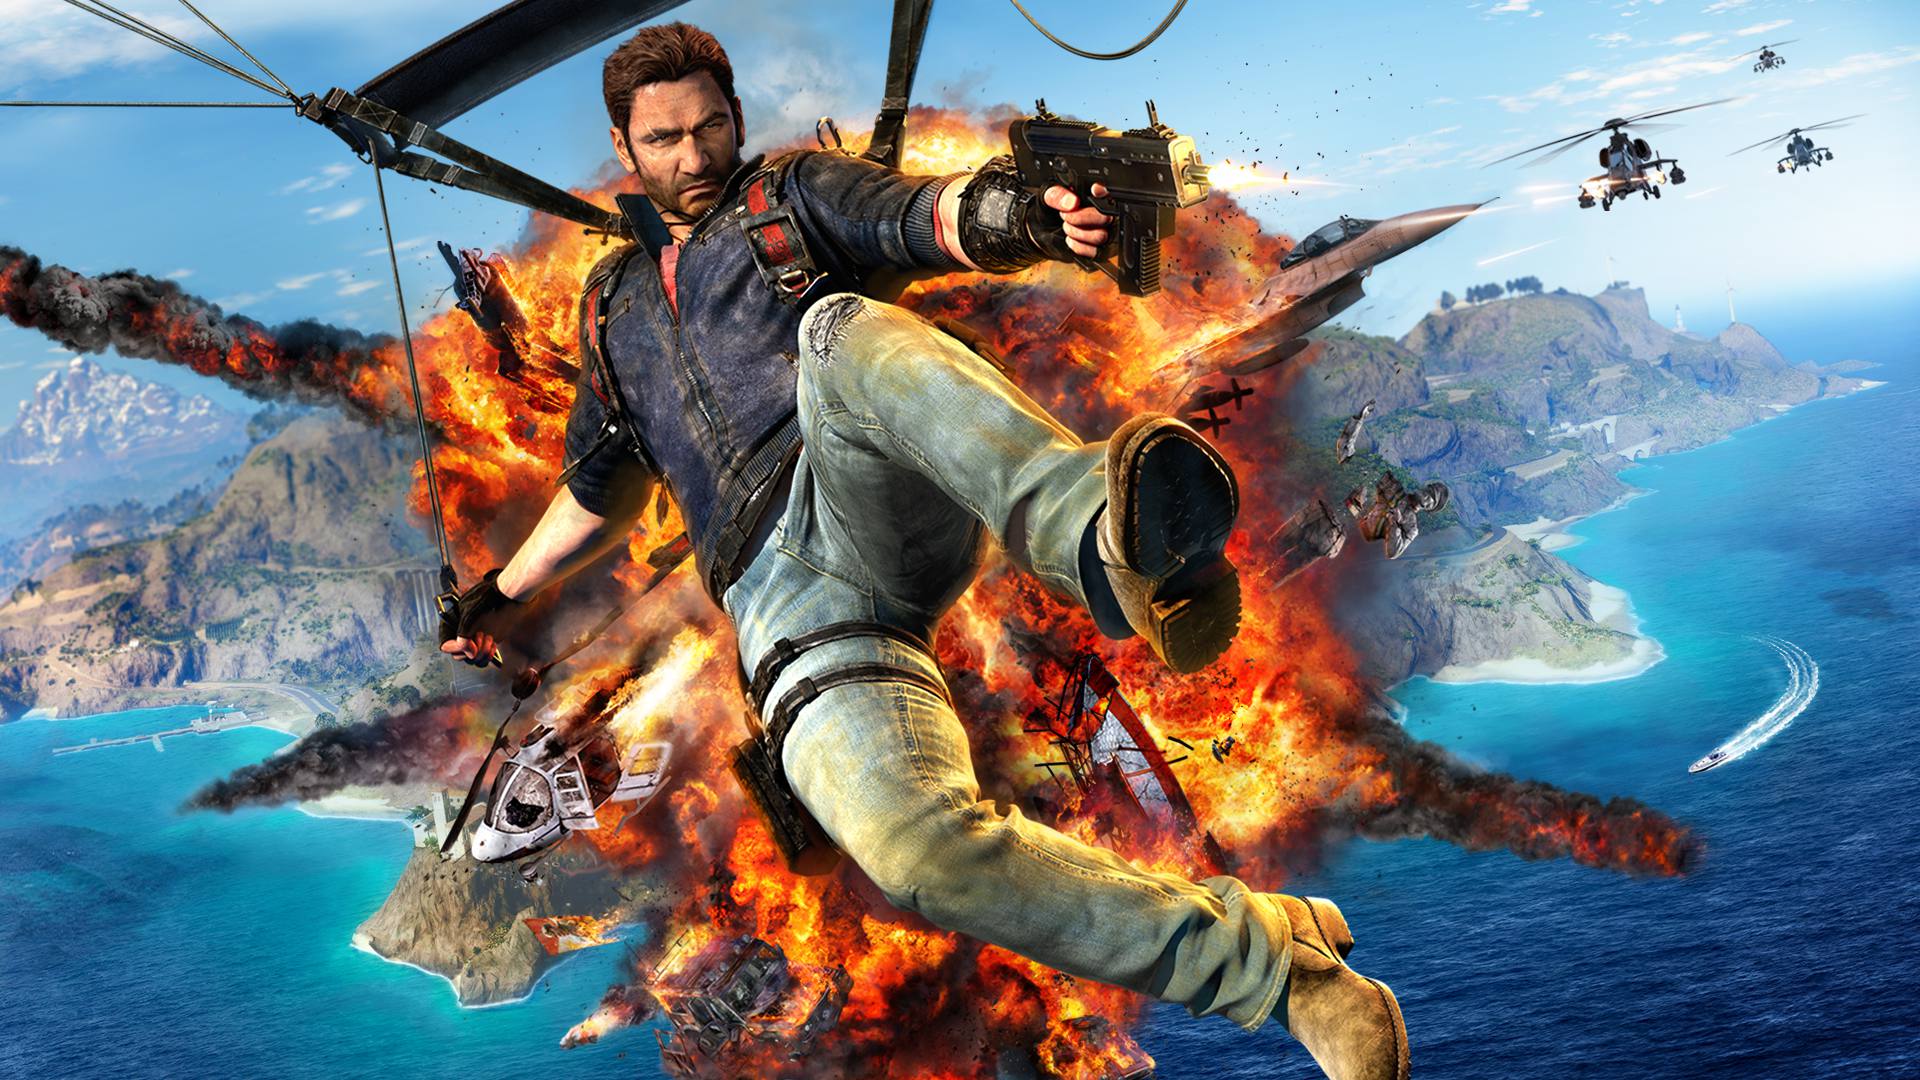 Wallpaper Just cause 3, video game